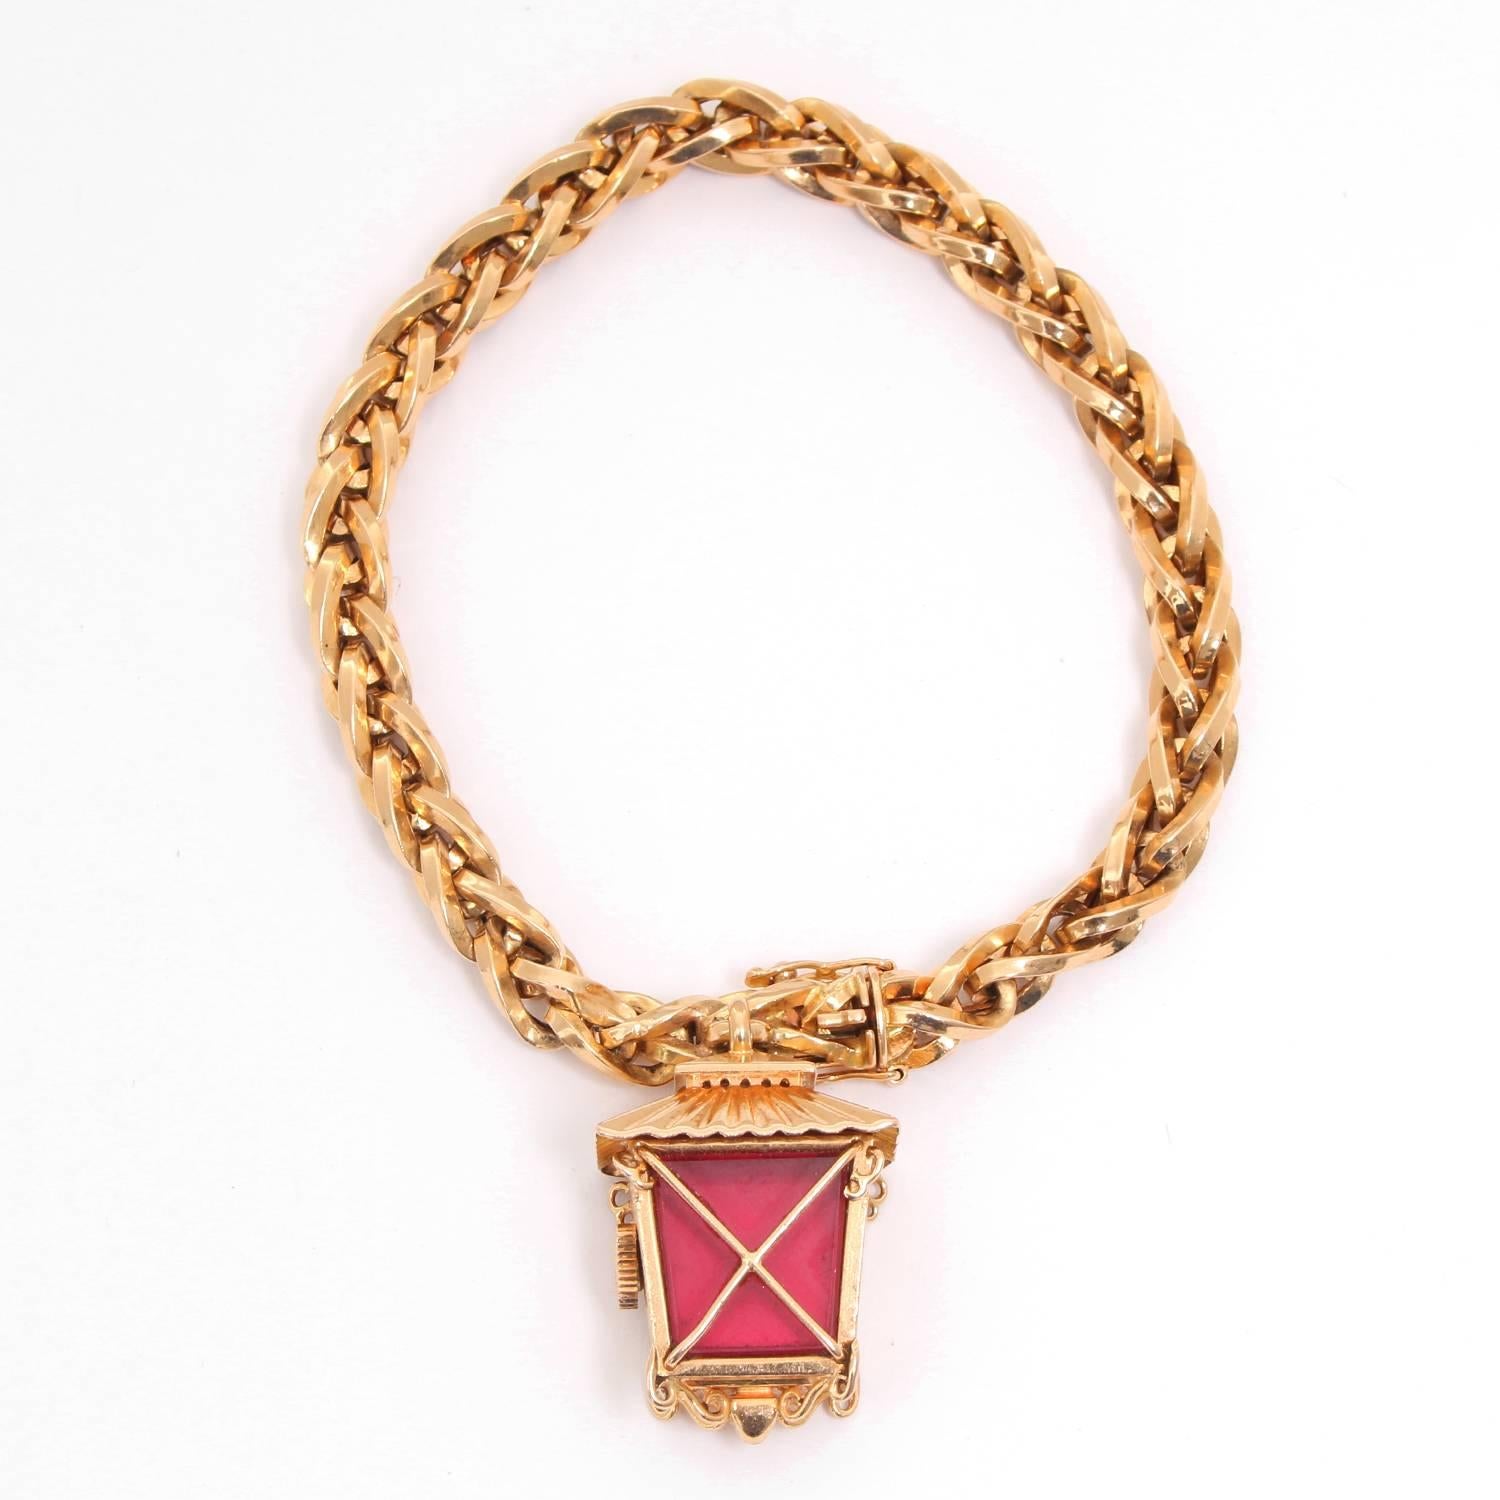 Rolex Lantern Charm Bracelet Watch Circa 1960's -  Manual wind. 18K Yellow Gold; red enamel back. White dial with stink hour markers. 18K Yellow Gold link bracelet. Pre-owned with Rolex box. Case and bracelet are of Rolex manufacture. Extremely